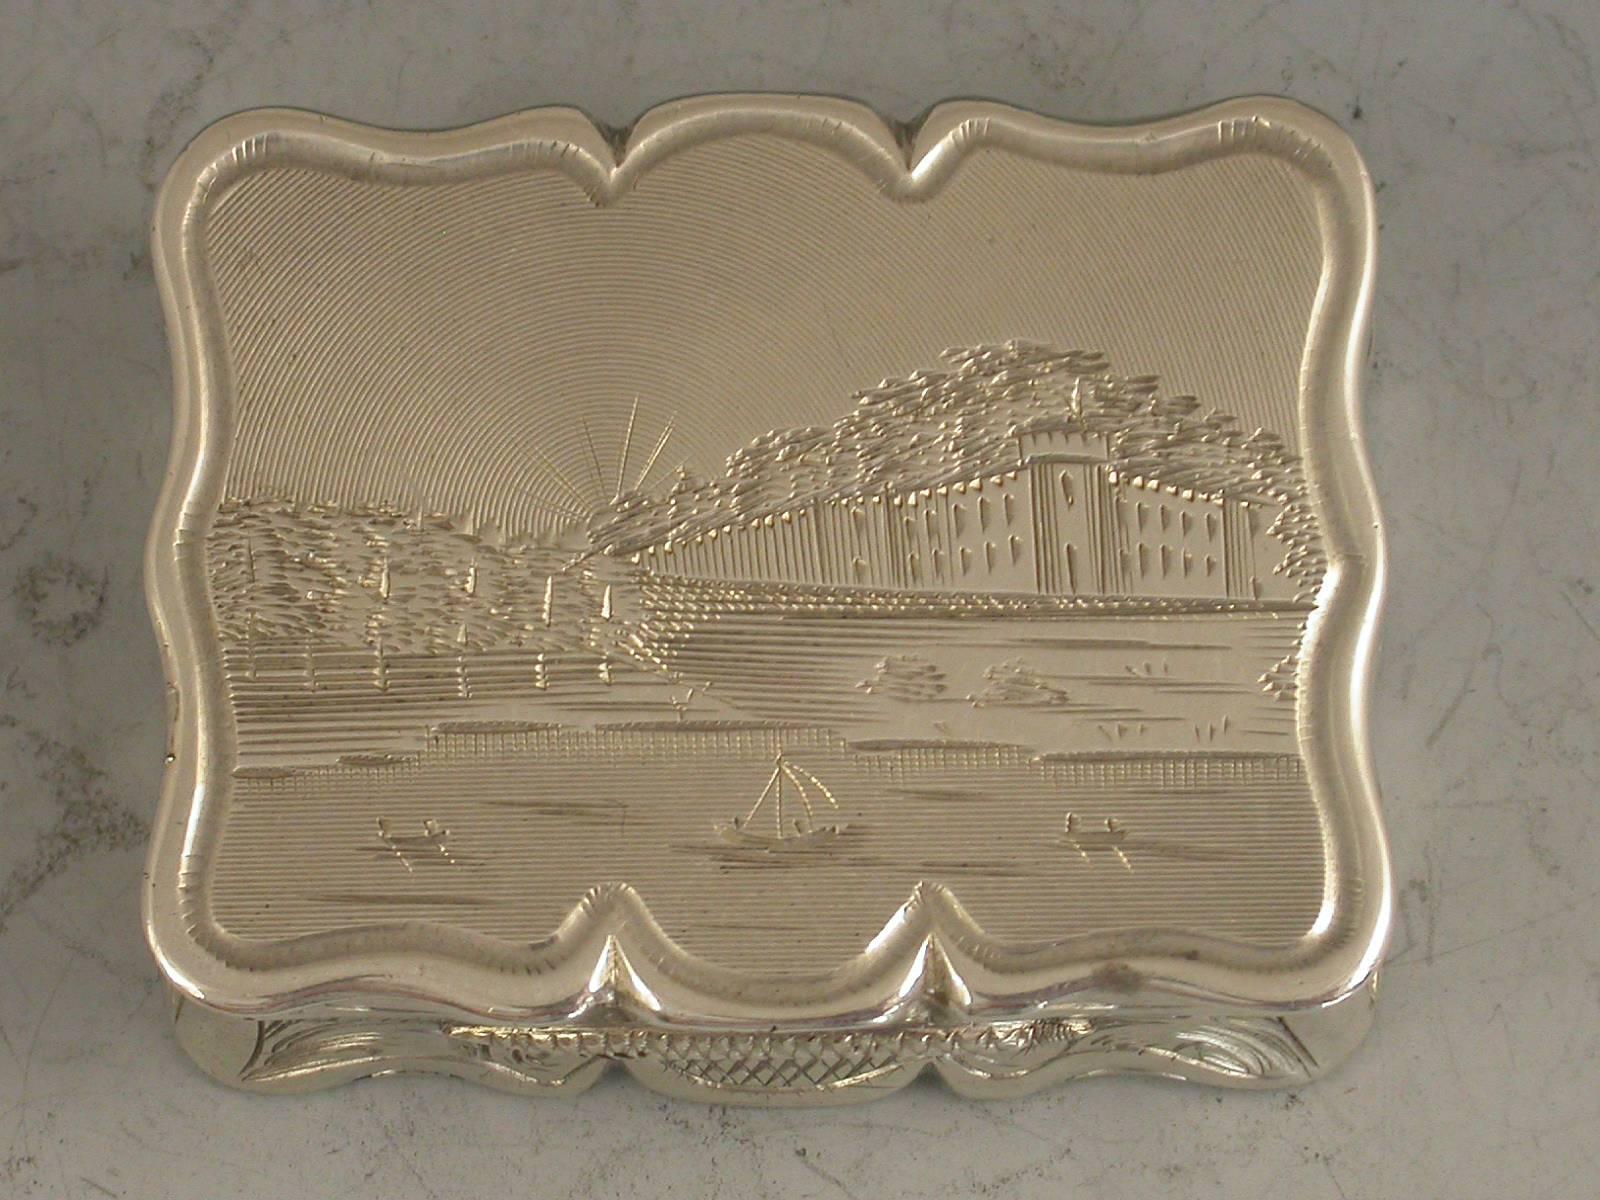 A rare Victorian silver Vinaigrette of shaped rectangular form, the base engraved with scrolls and a cartouche with presentation inscription, the lid engraved with a scene depicting an unidentified castle or stately home with a lake in the